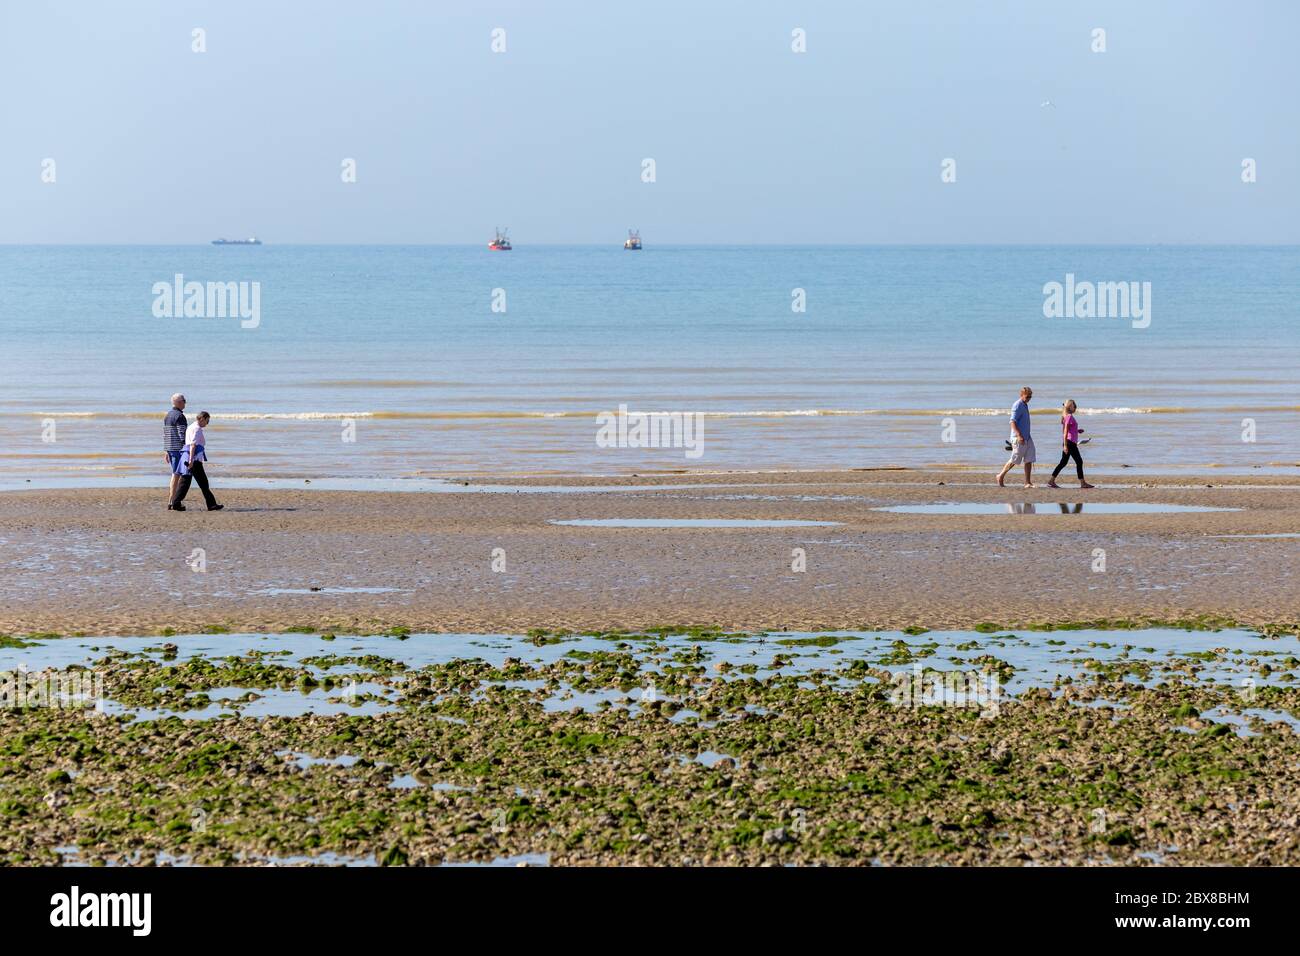 Worthing, Sussex, UK; 25th May 2020; Two Couples Walking Along The Seashore.  Two Fishing Boats and a Larger Ship Can Be Seen on the Horizen Stock Photo